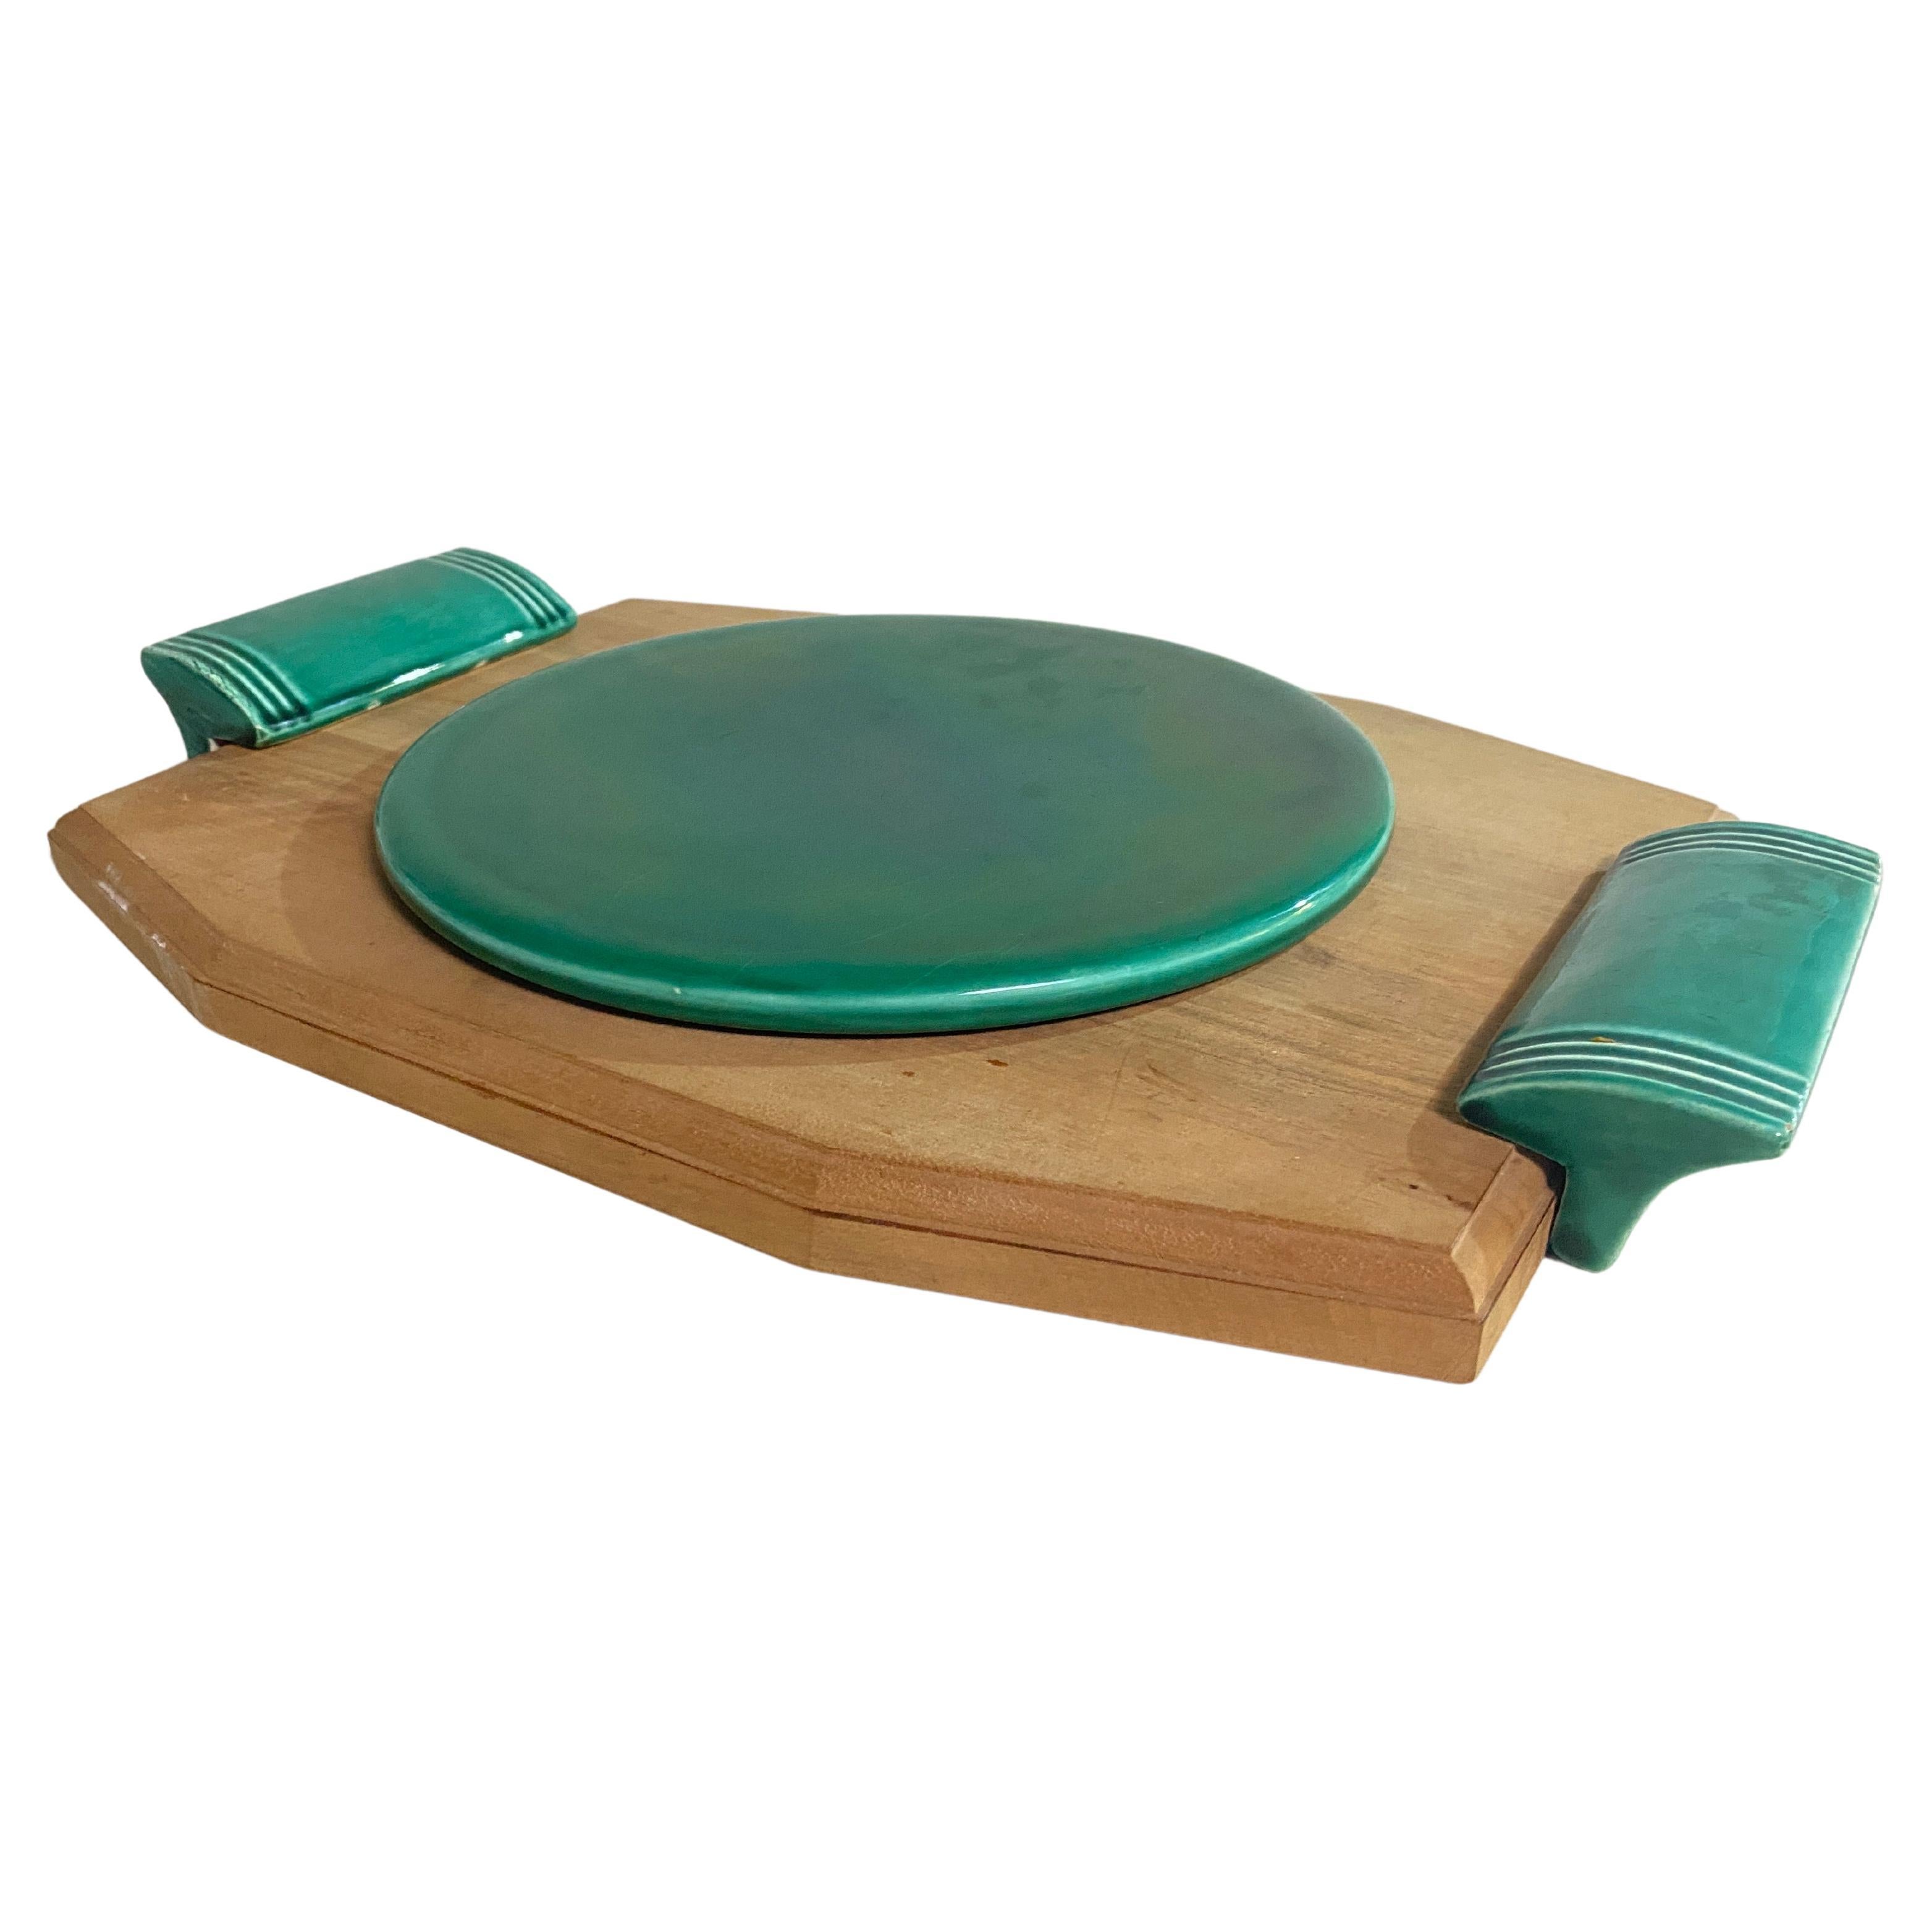 Cheese Tray in Ceramic and Wood France 1970s Brown and Green Color